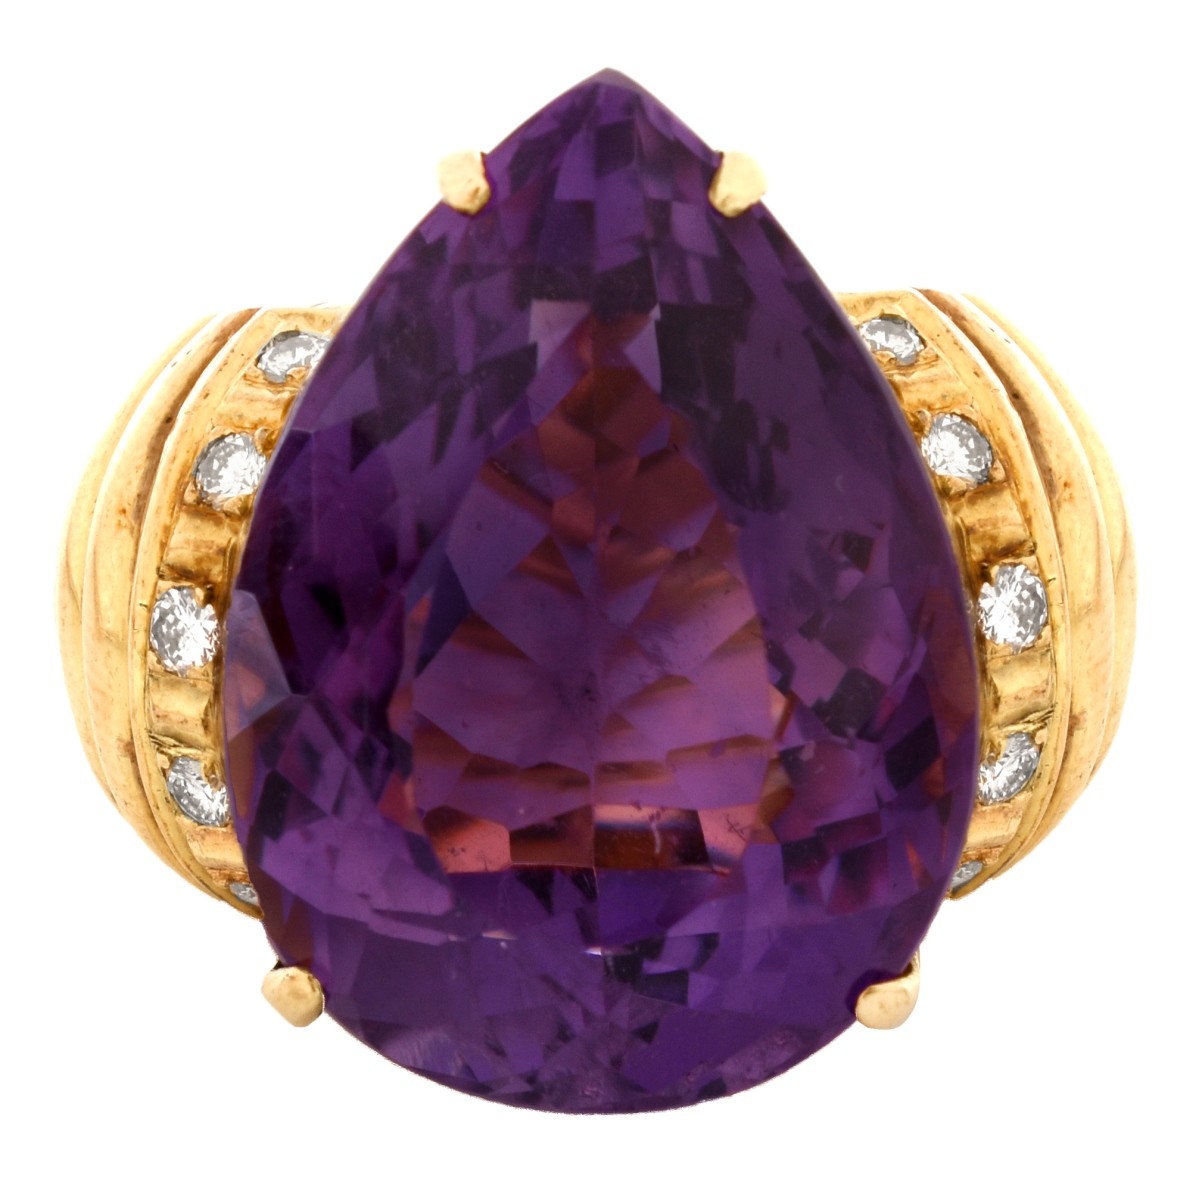 Vintage Amethyst, Diamond and 14K Ring - Image 2 of 5